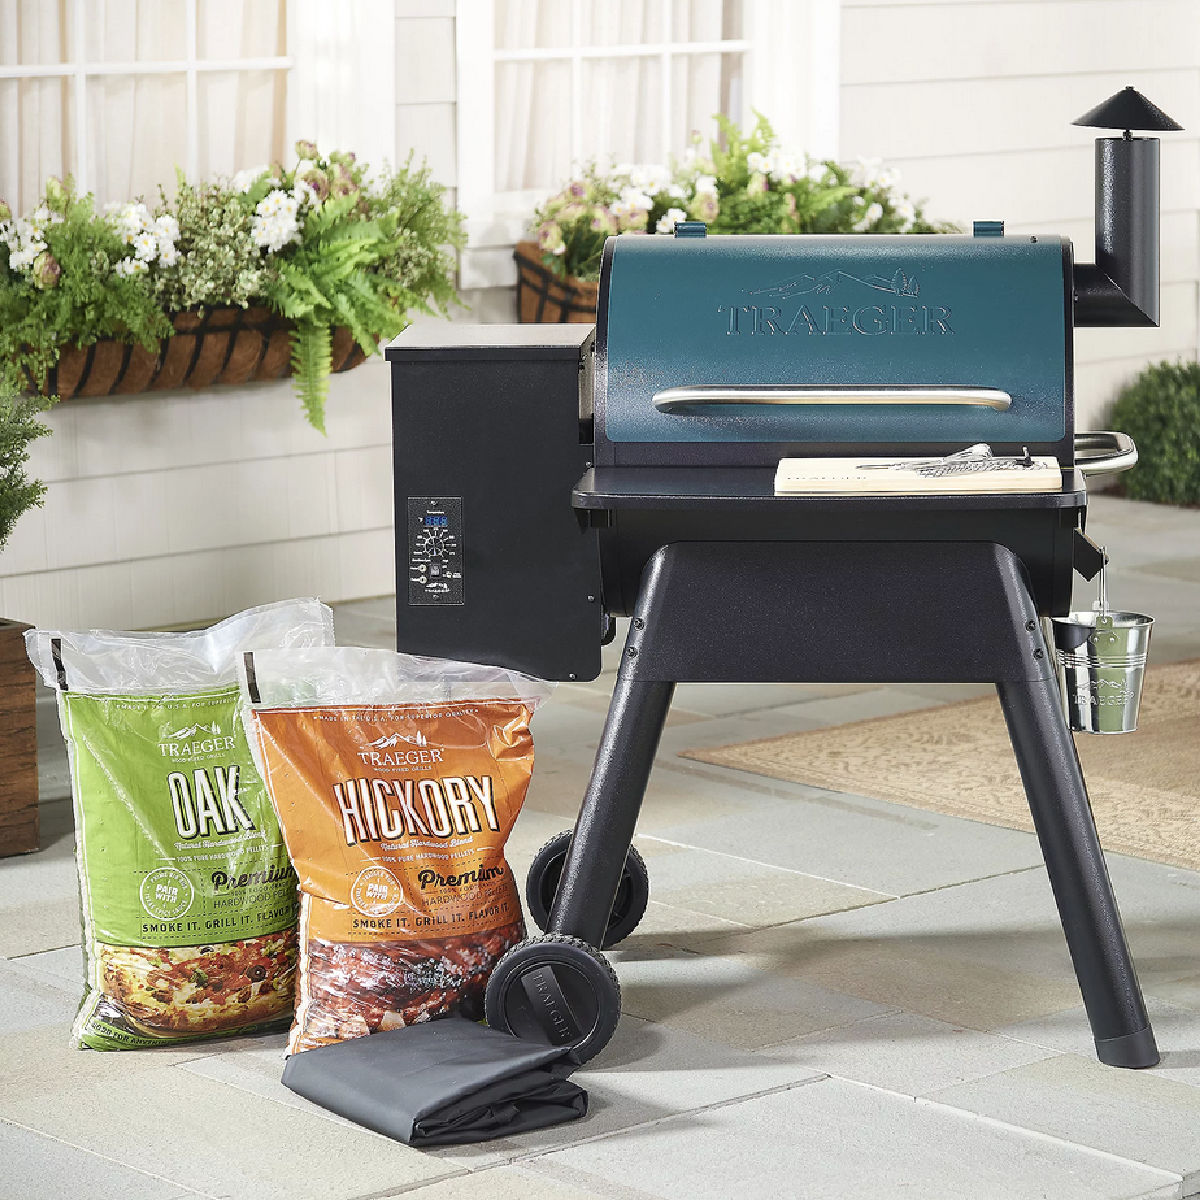 Traeger Prairie 572 sq. in. Wood Fired Grill & Smoker